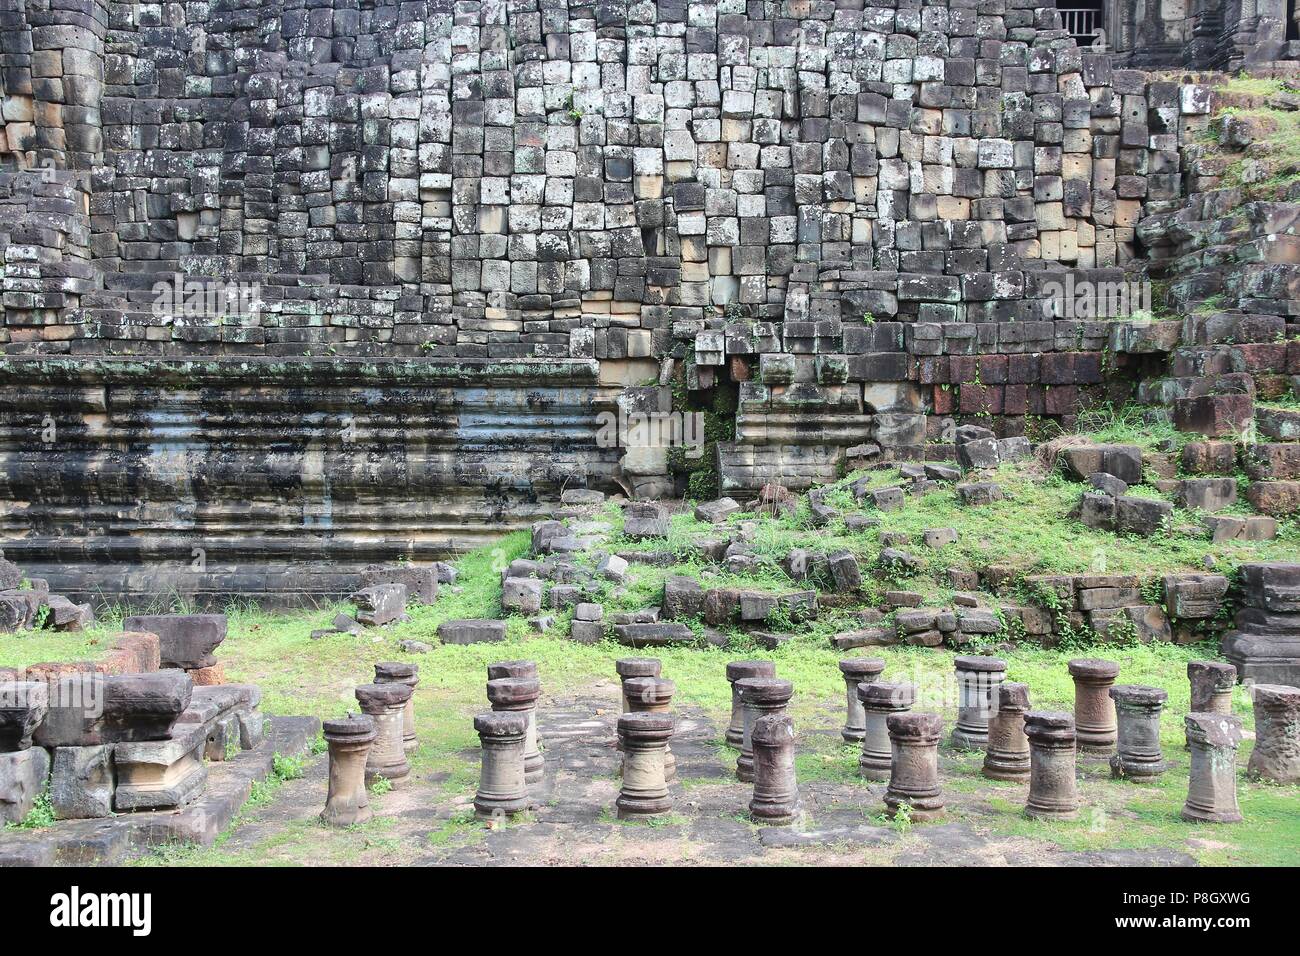 Baphuon - abandoned Khmer temple in Angkor, Cambodia, Southeast Asia. UNESCO World Heritage Site. Stock Photo